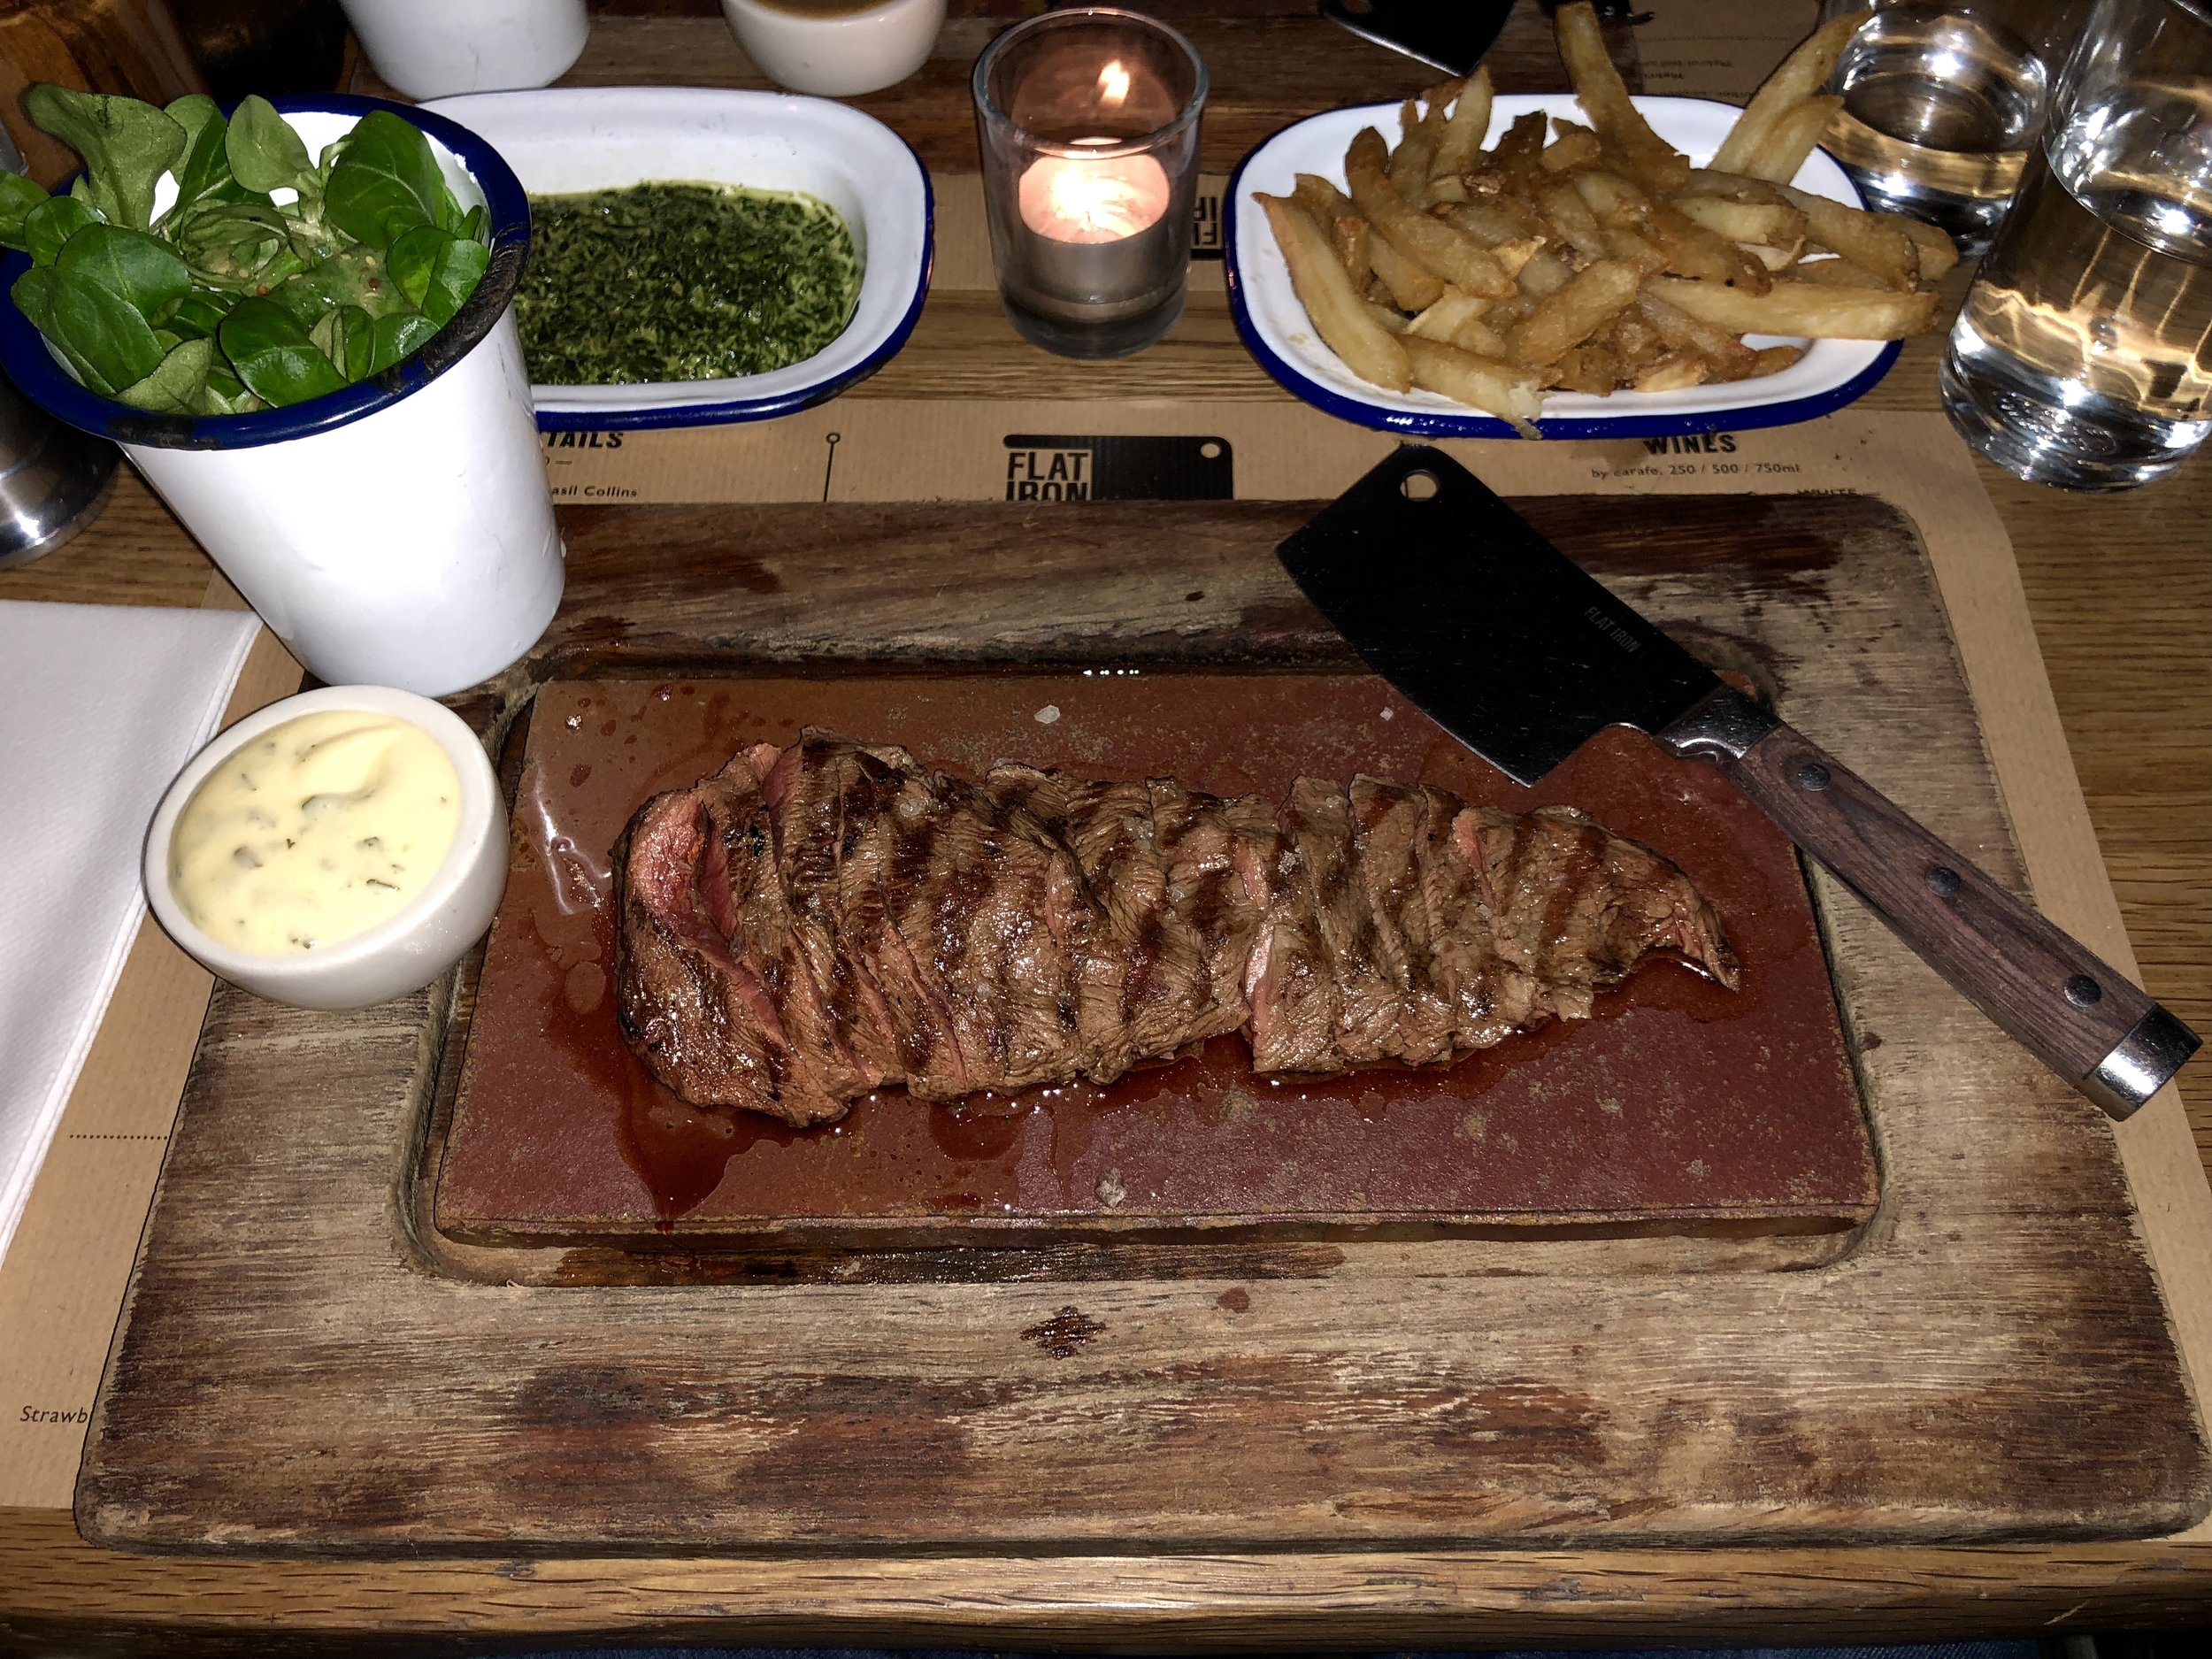 Steak and fries with salad at Flat Iron in London